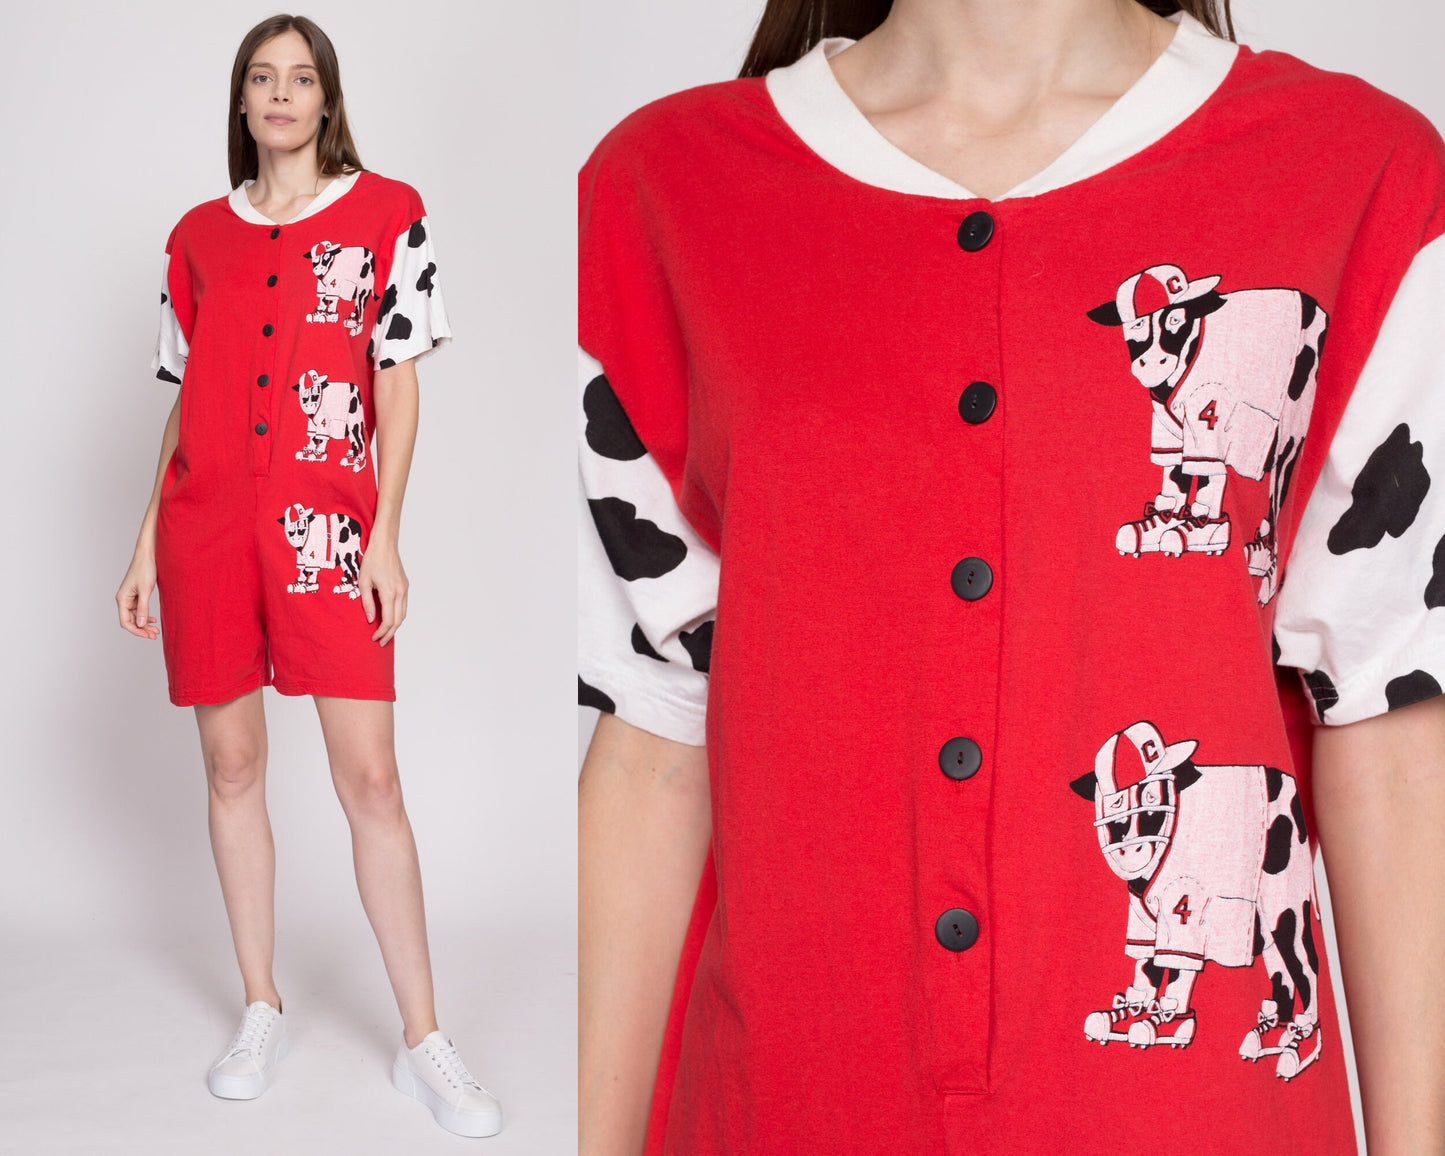 M-L| 80s Retro Cow Romper - Medium to Large | Vintage Red White Slouchy Loungewear Playsuit Outfit